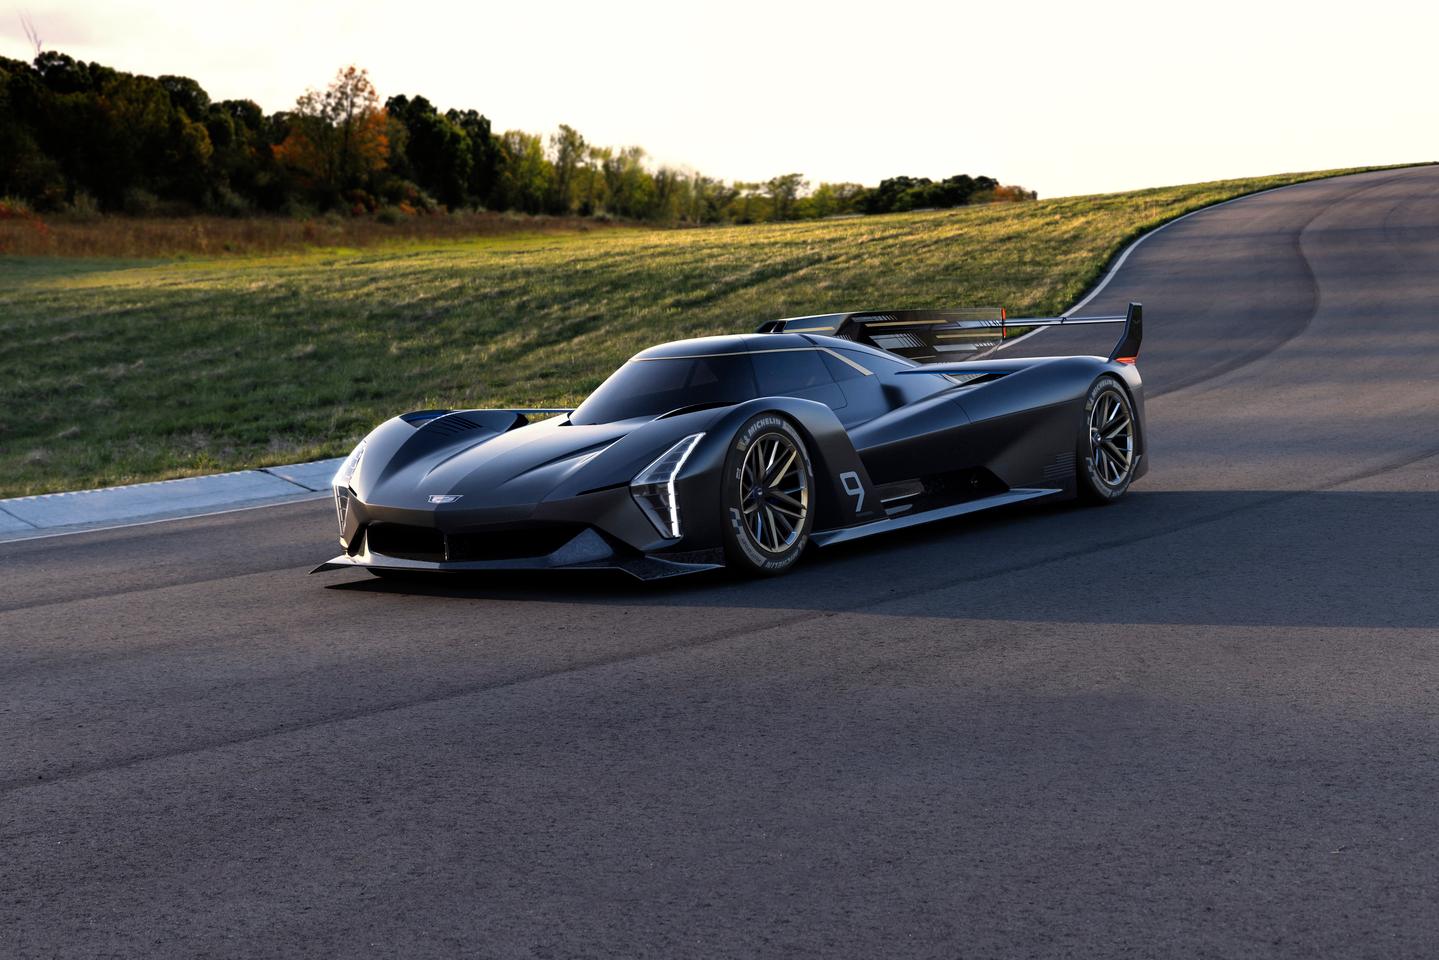 Cadillac debuted its Project GTP Hypercar on Thursday, stoking excitement for the upcoming 2023 racing season